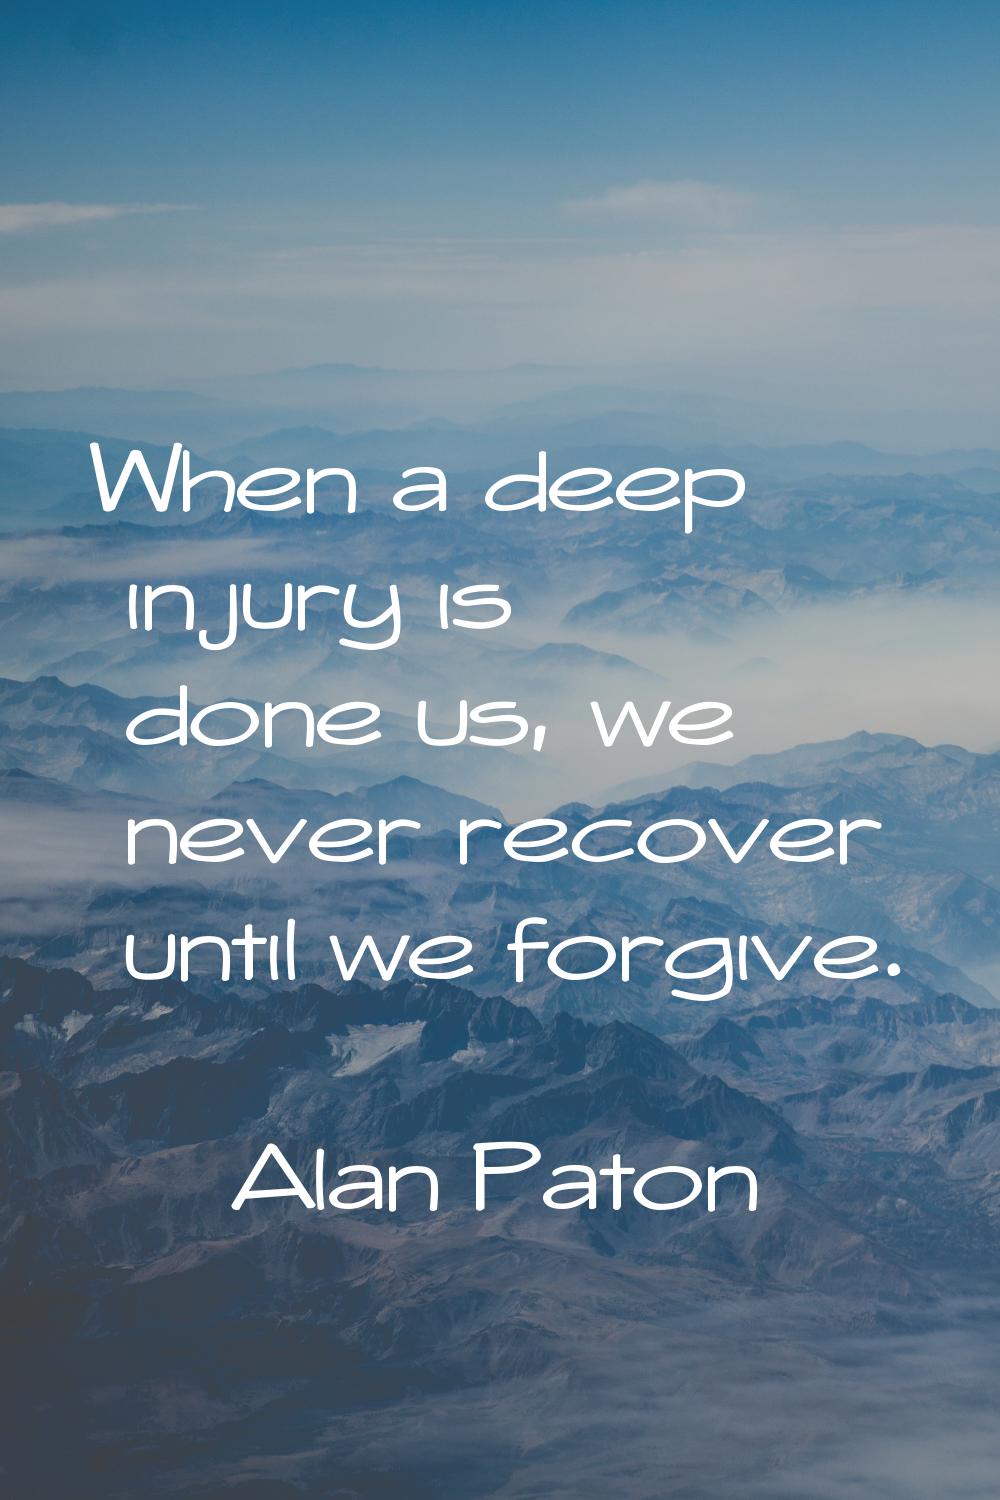 When a deep injury is done us, we never recover until we forgive.